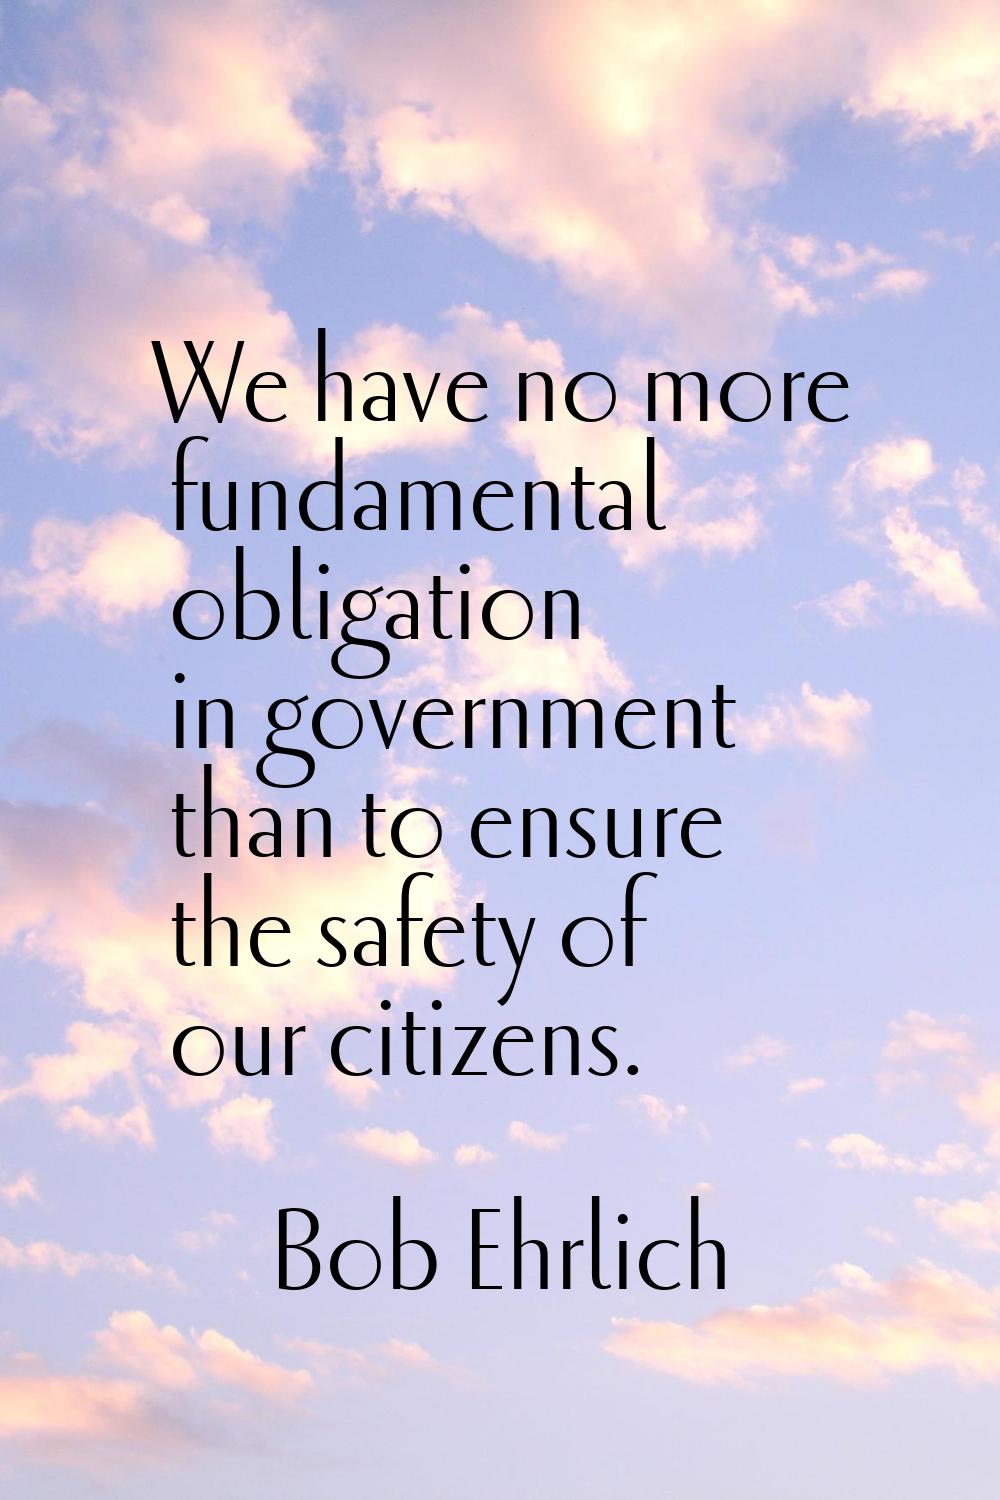 We have no more fundamental obligation in government than to ensure the safety of our citizens.